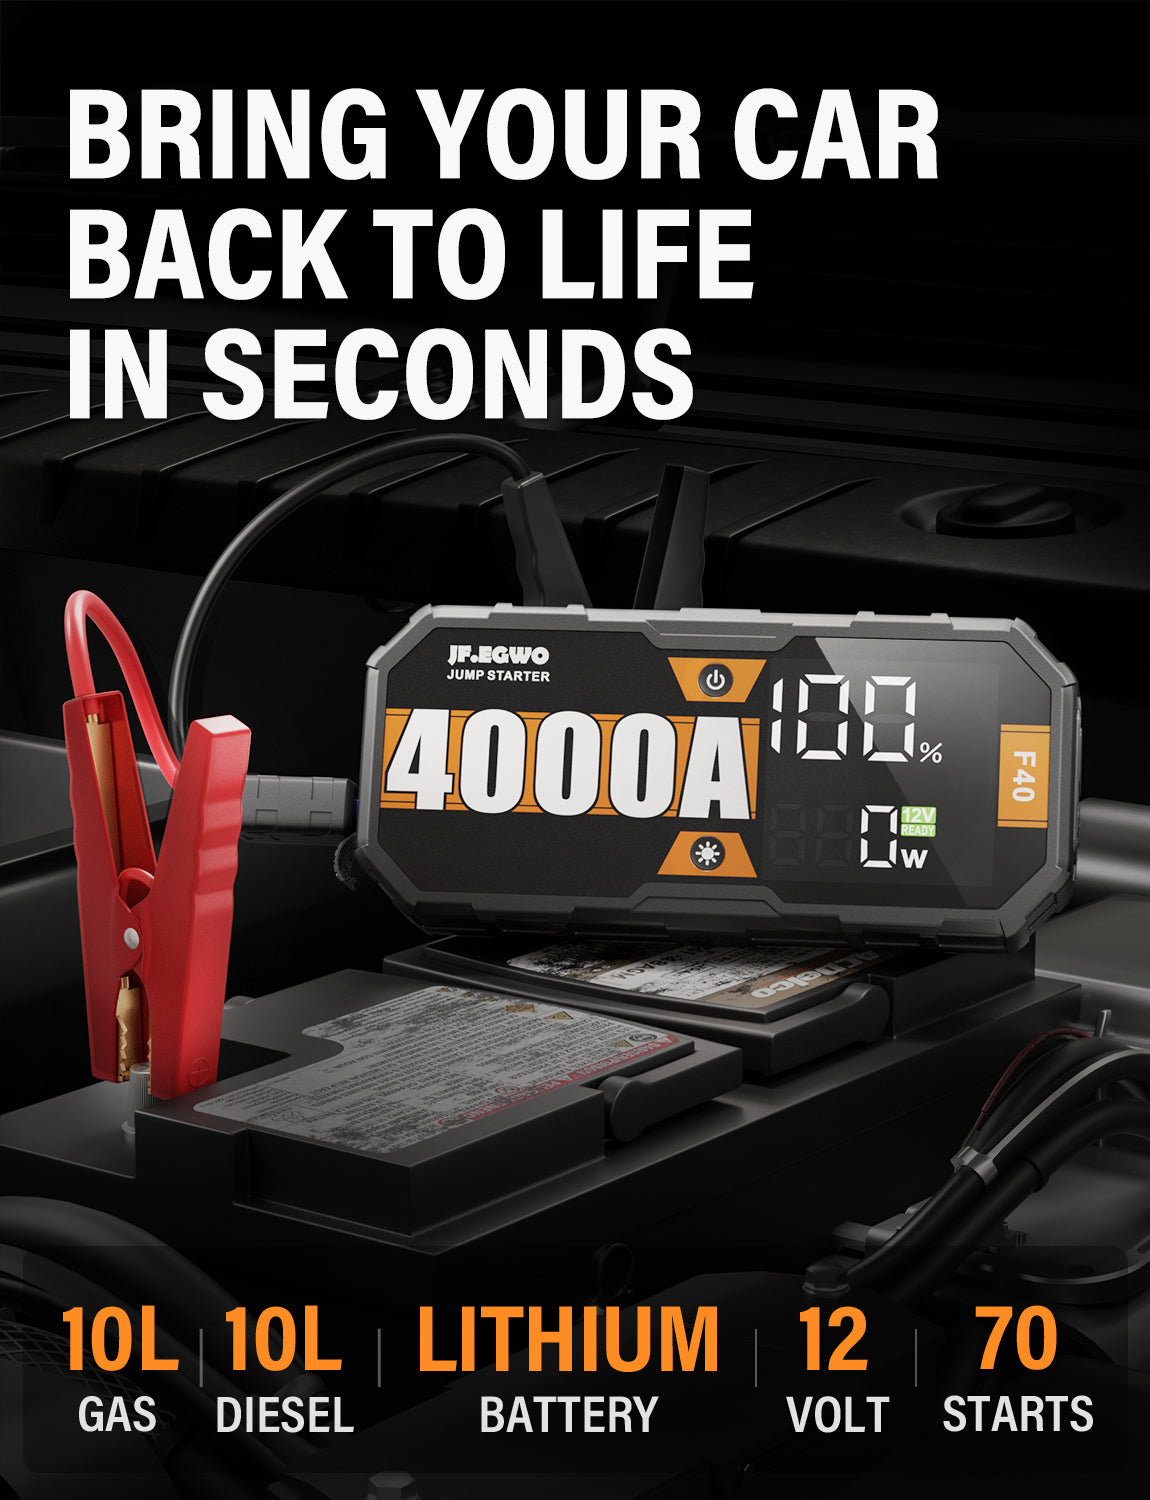 JFEGWO Car 4000A 6000A Portable Jump Starter With Power Bank Fast